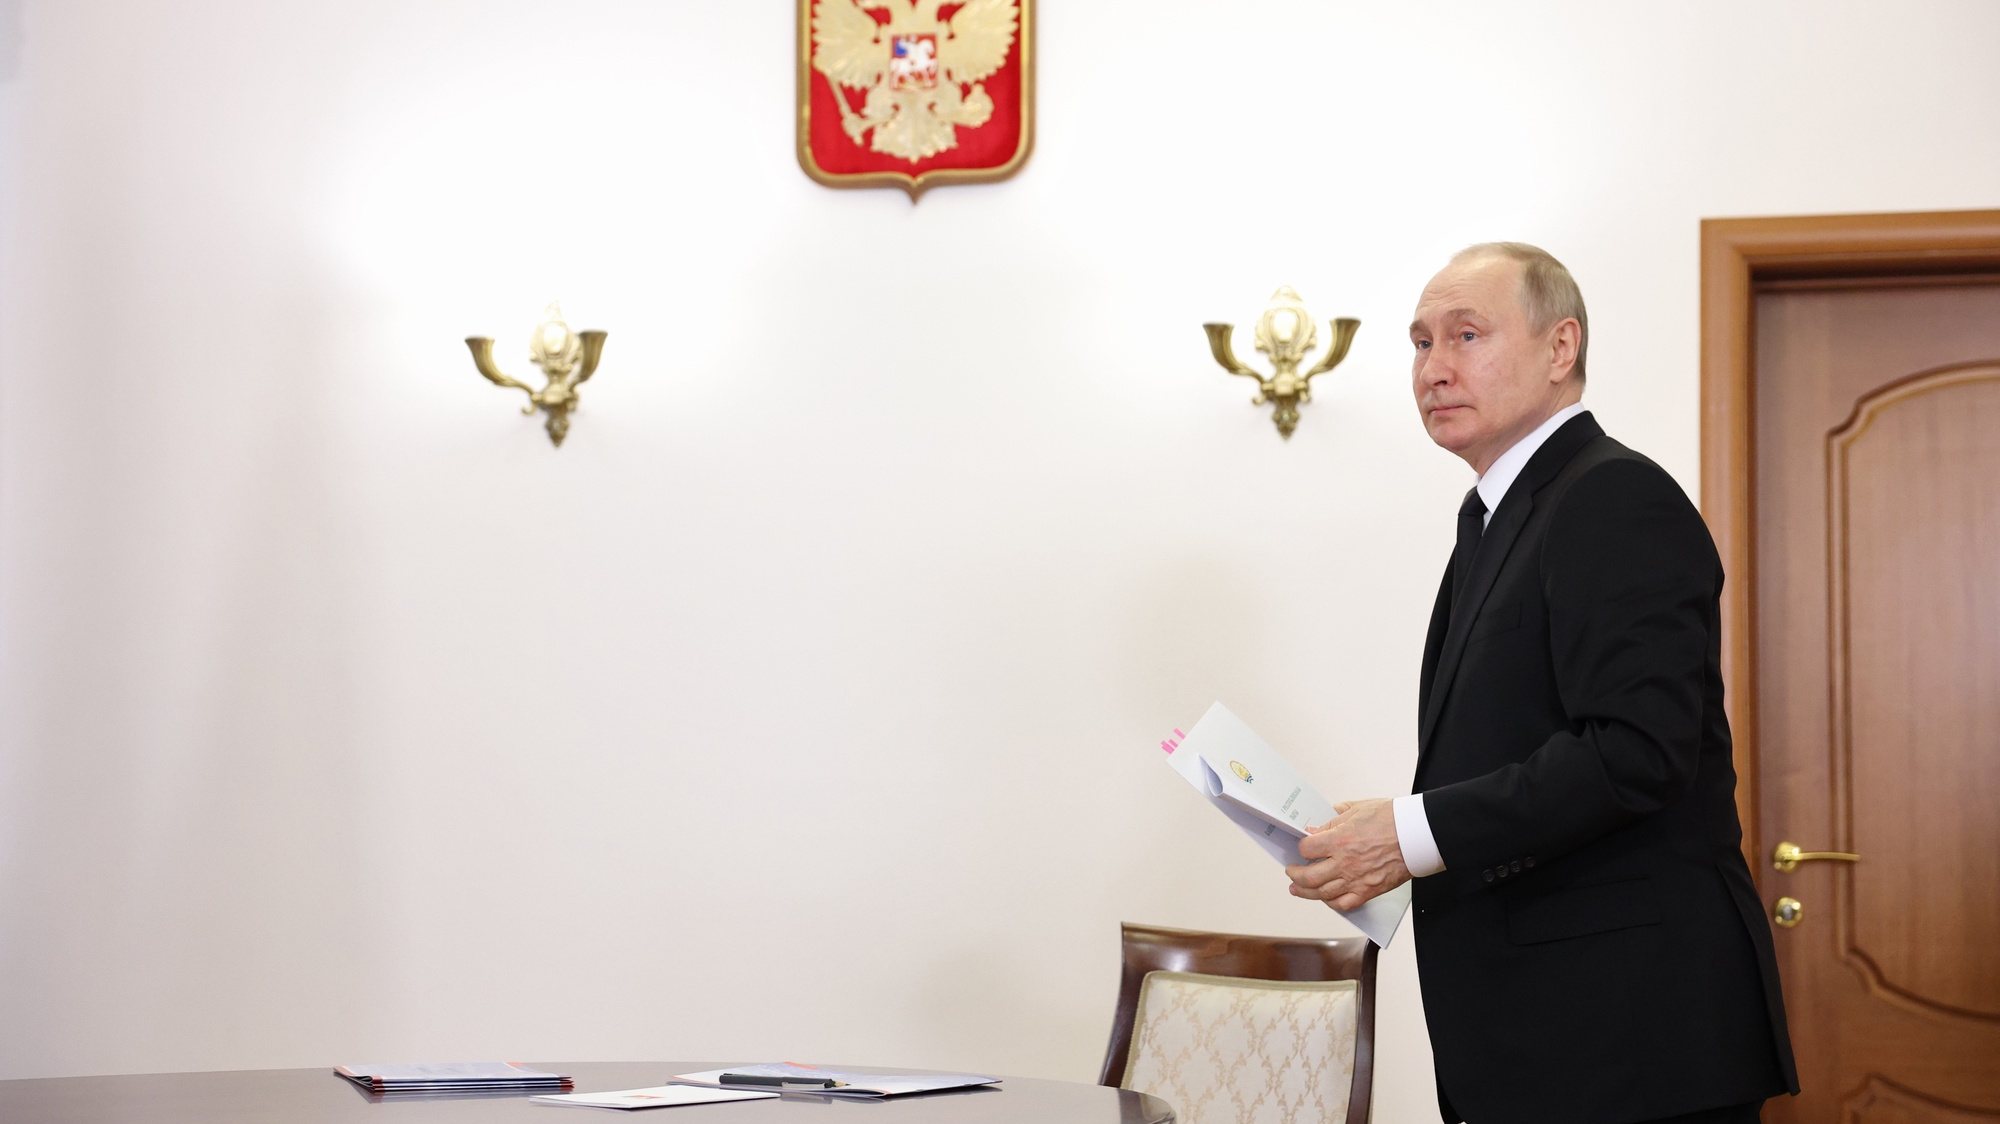 epa10402957 Russian President Vladimir Putin enters a hall for meeting with Head of Bashkortostan Radiy Khabirov (not pictured) in Ufa, Bashkortostan state, Russia, 13 January 2023. Putin arrived to Ufa to attend a farewell ceremony for Murtaza Rakhimov, who served as the first president of the Republic of Bashkortostan between 1993 and 2010 and died on 11 January 2023.  EPA/SERGEI BOBYLEV/SPUTNIK/KREMLIN POOL / POOL MANDATORY CREDIT